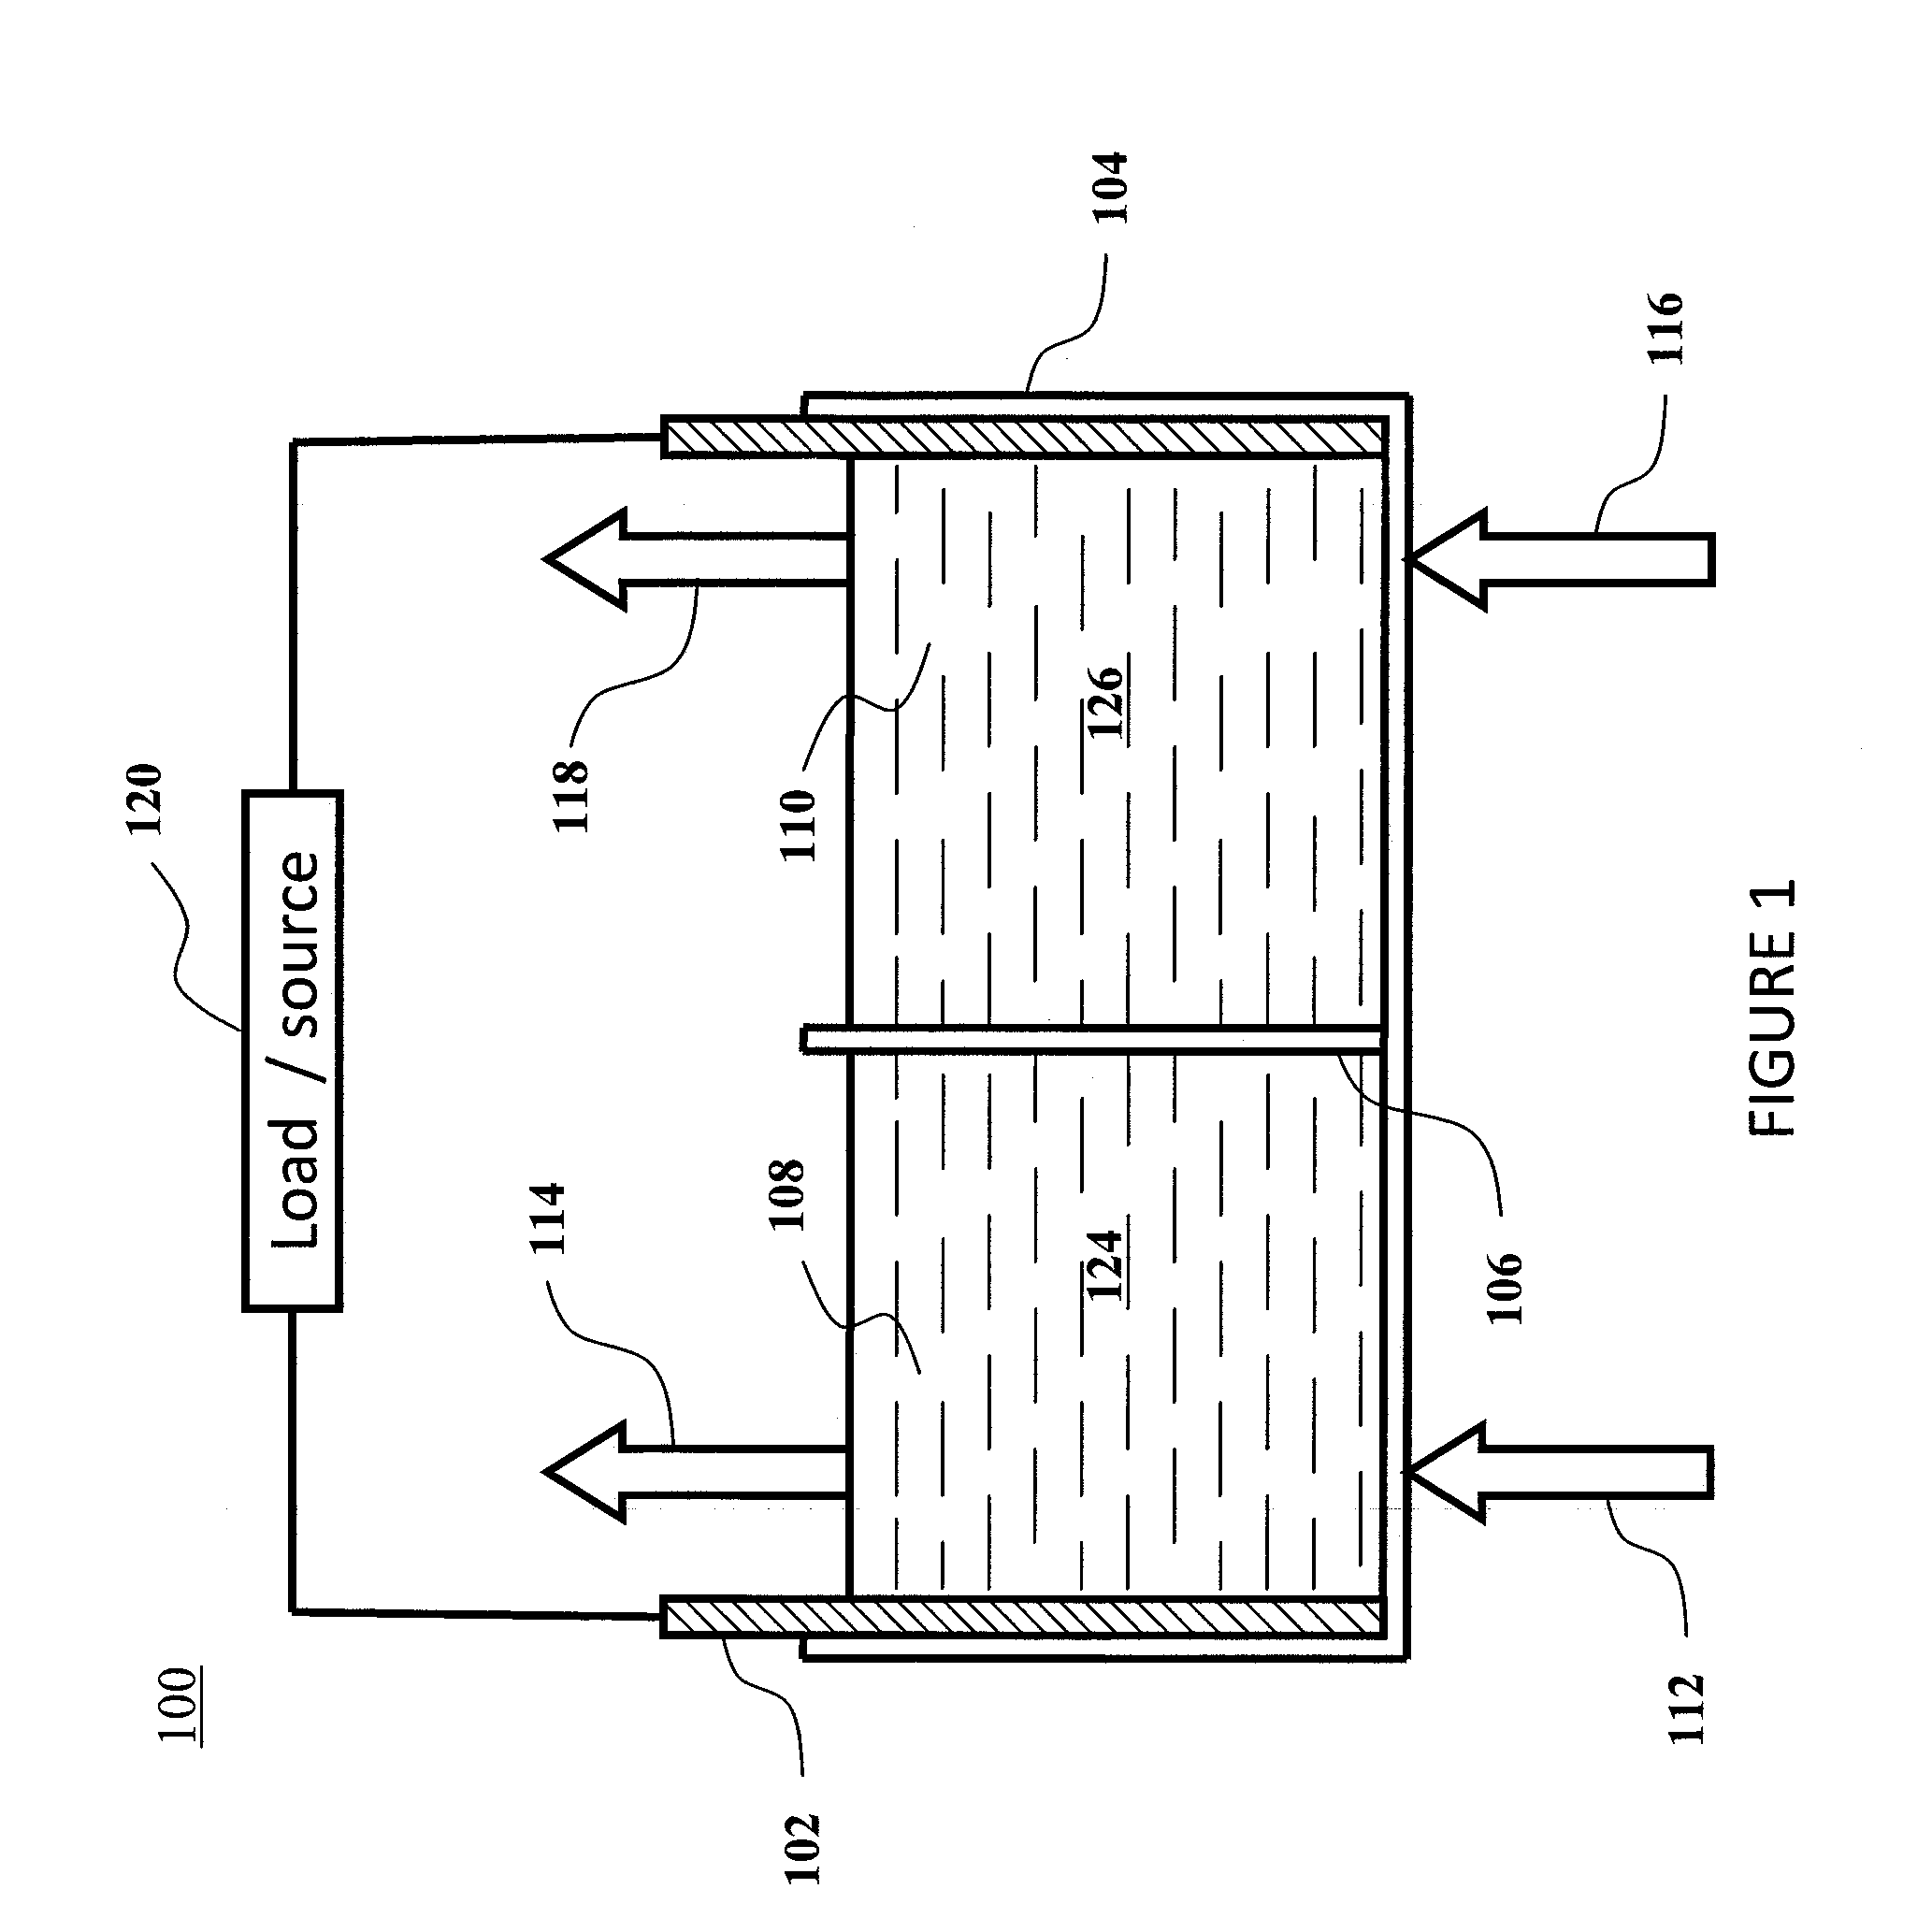 Methods for the preparation of electrolytes for chromium-iron redox flow batteries